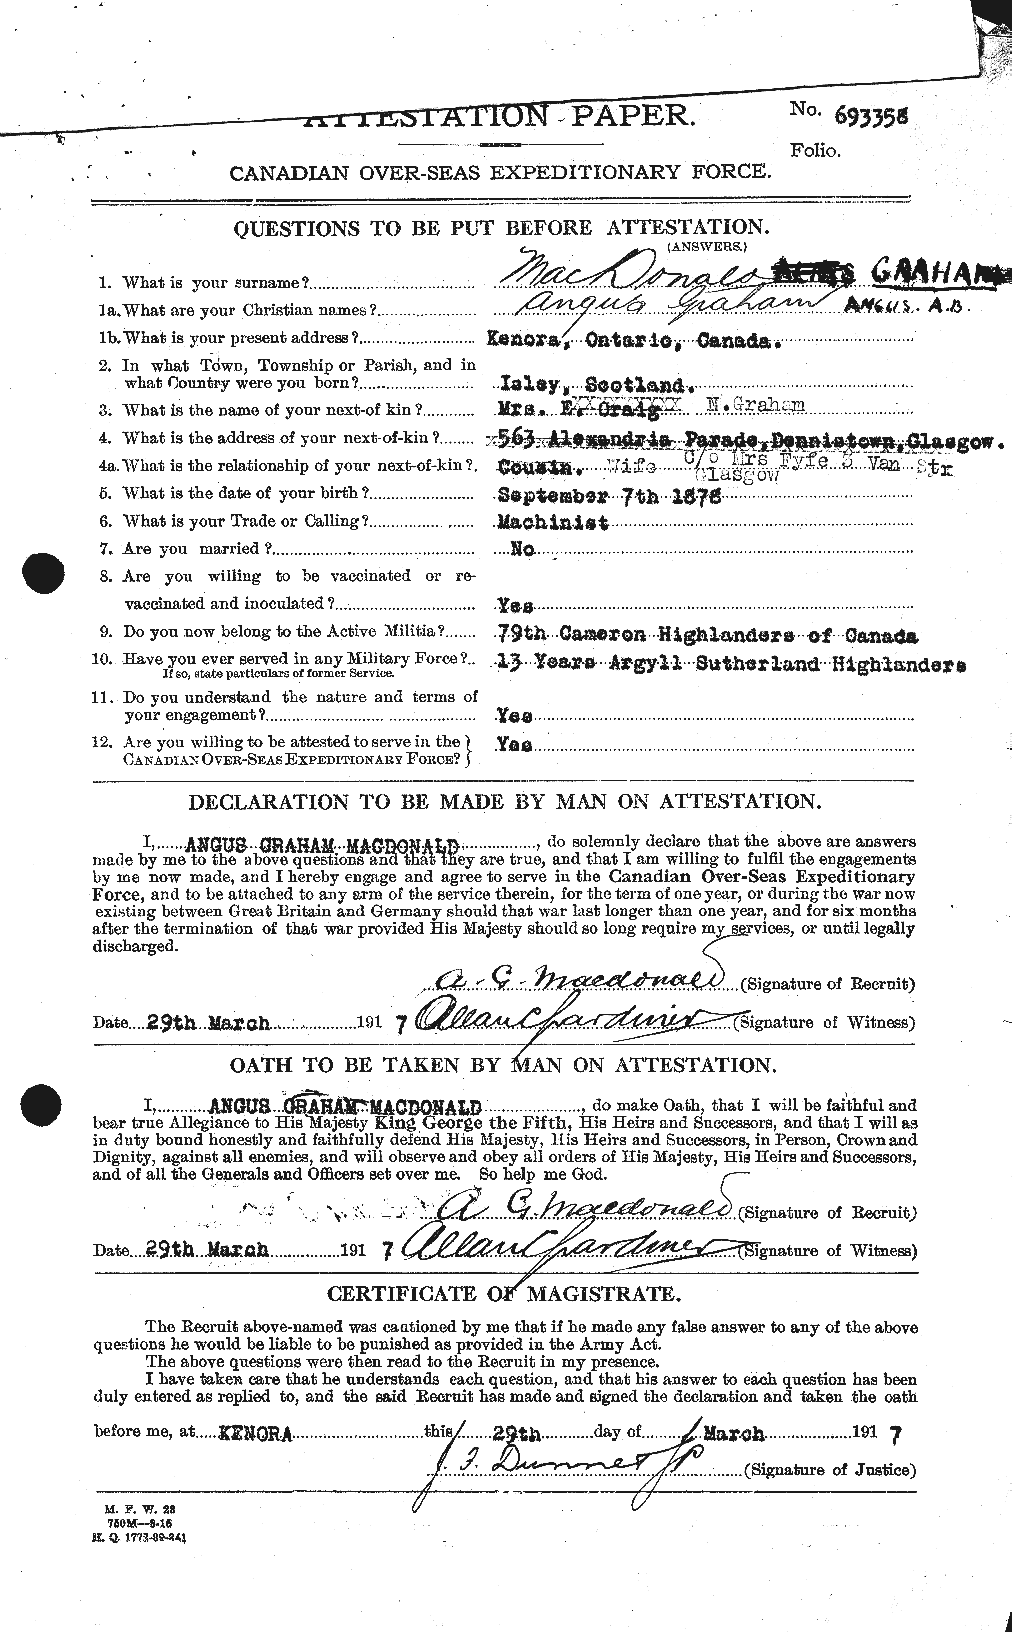 Personnel Records of the First World War - CEF 359625a